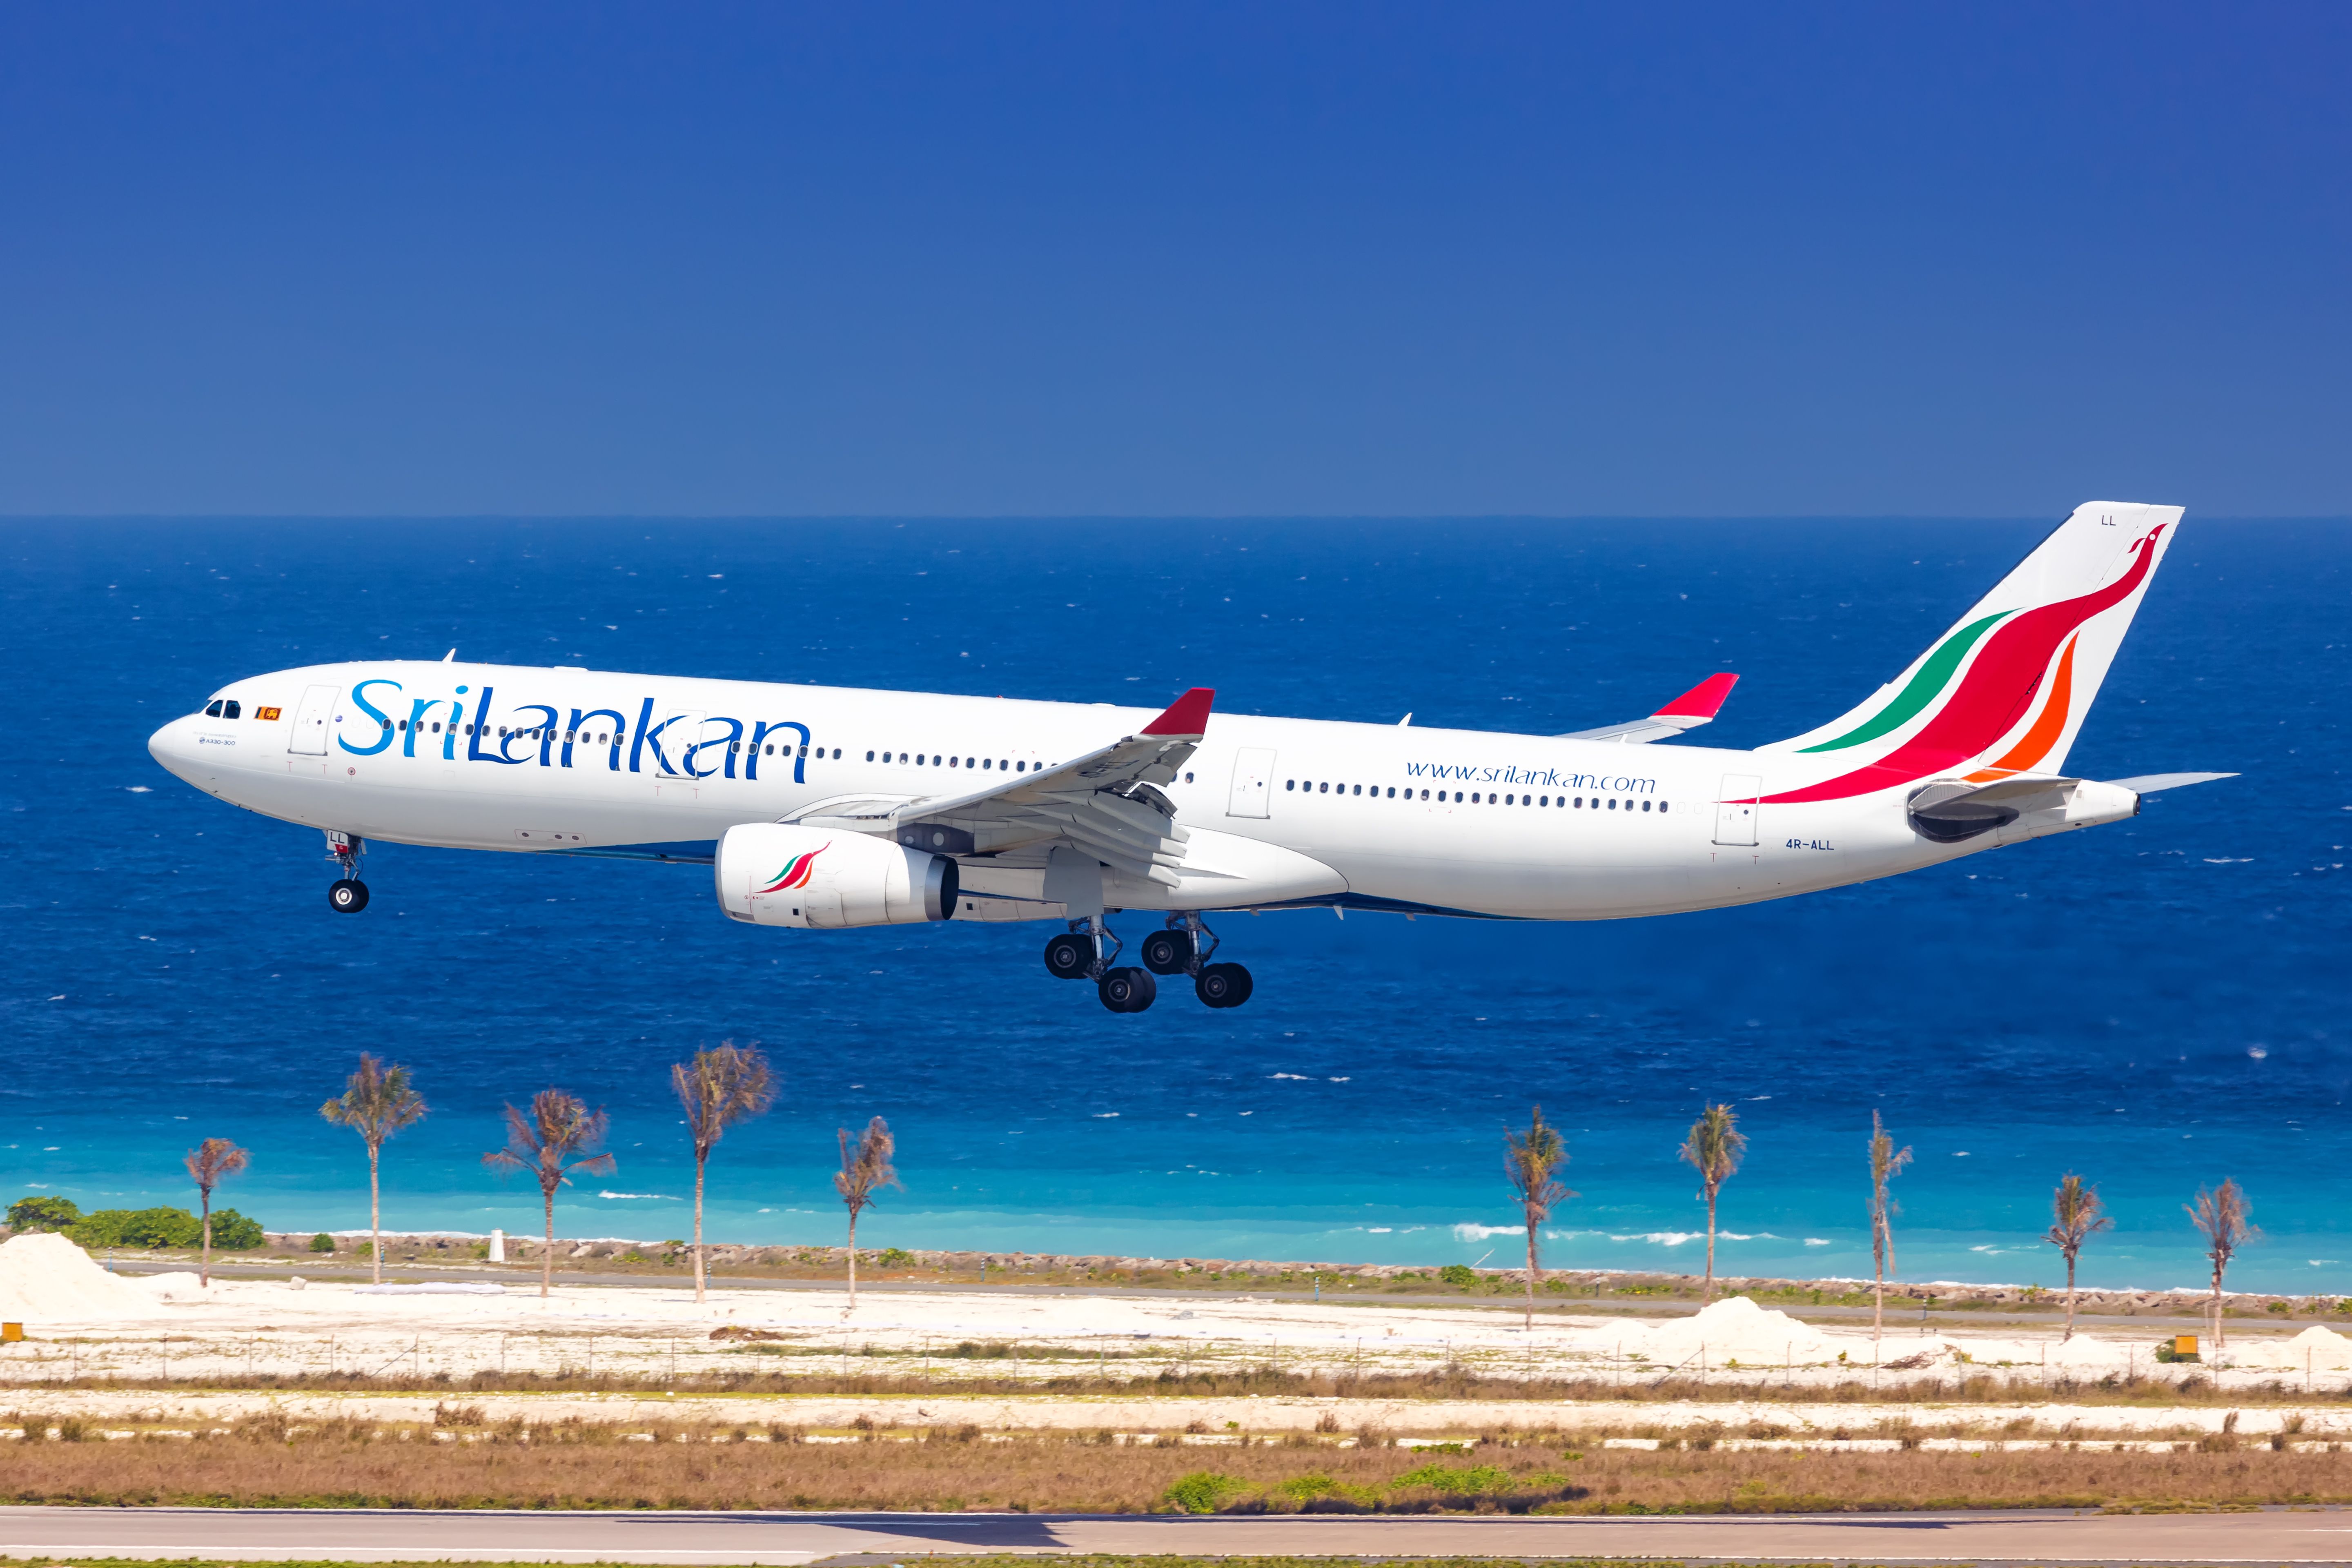 A SriLankan Airlines Airbus A330 about to land at an airport near a beach. 